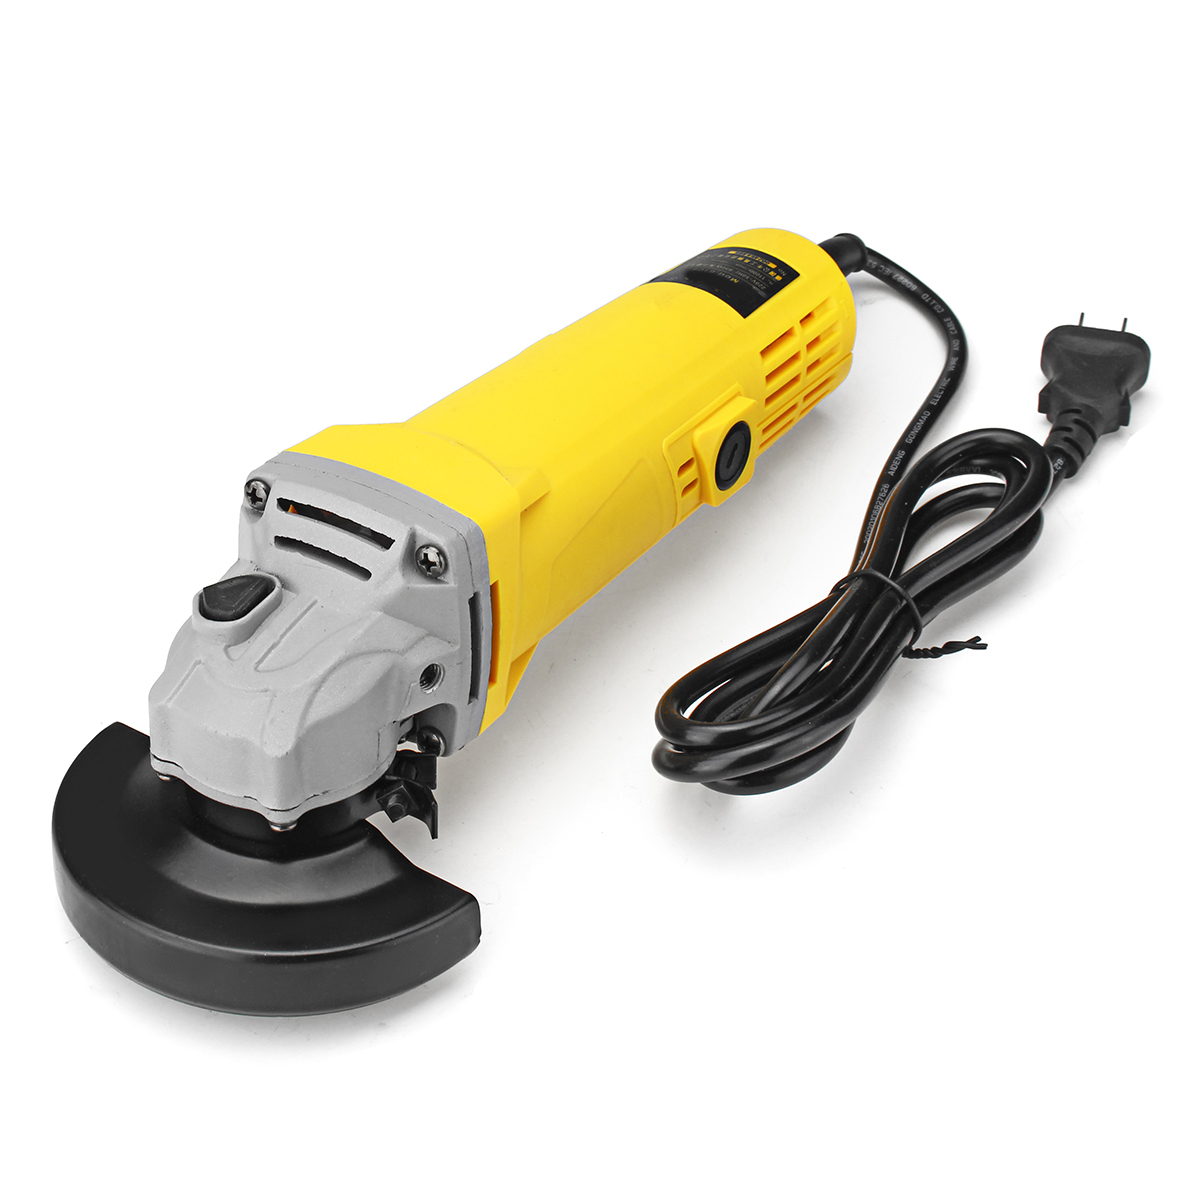 100mm-850W-220V-Portable-Electric-Angle-Grinder-Muti-Function-Household-Polish-Machine-Grinding-Cutt-1391941-5